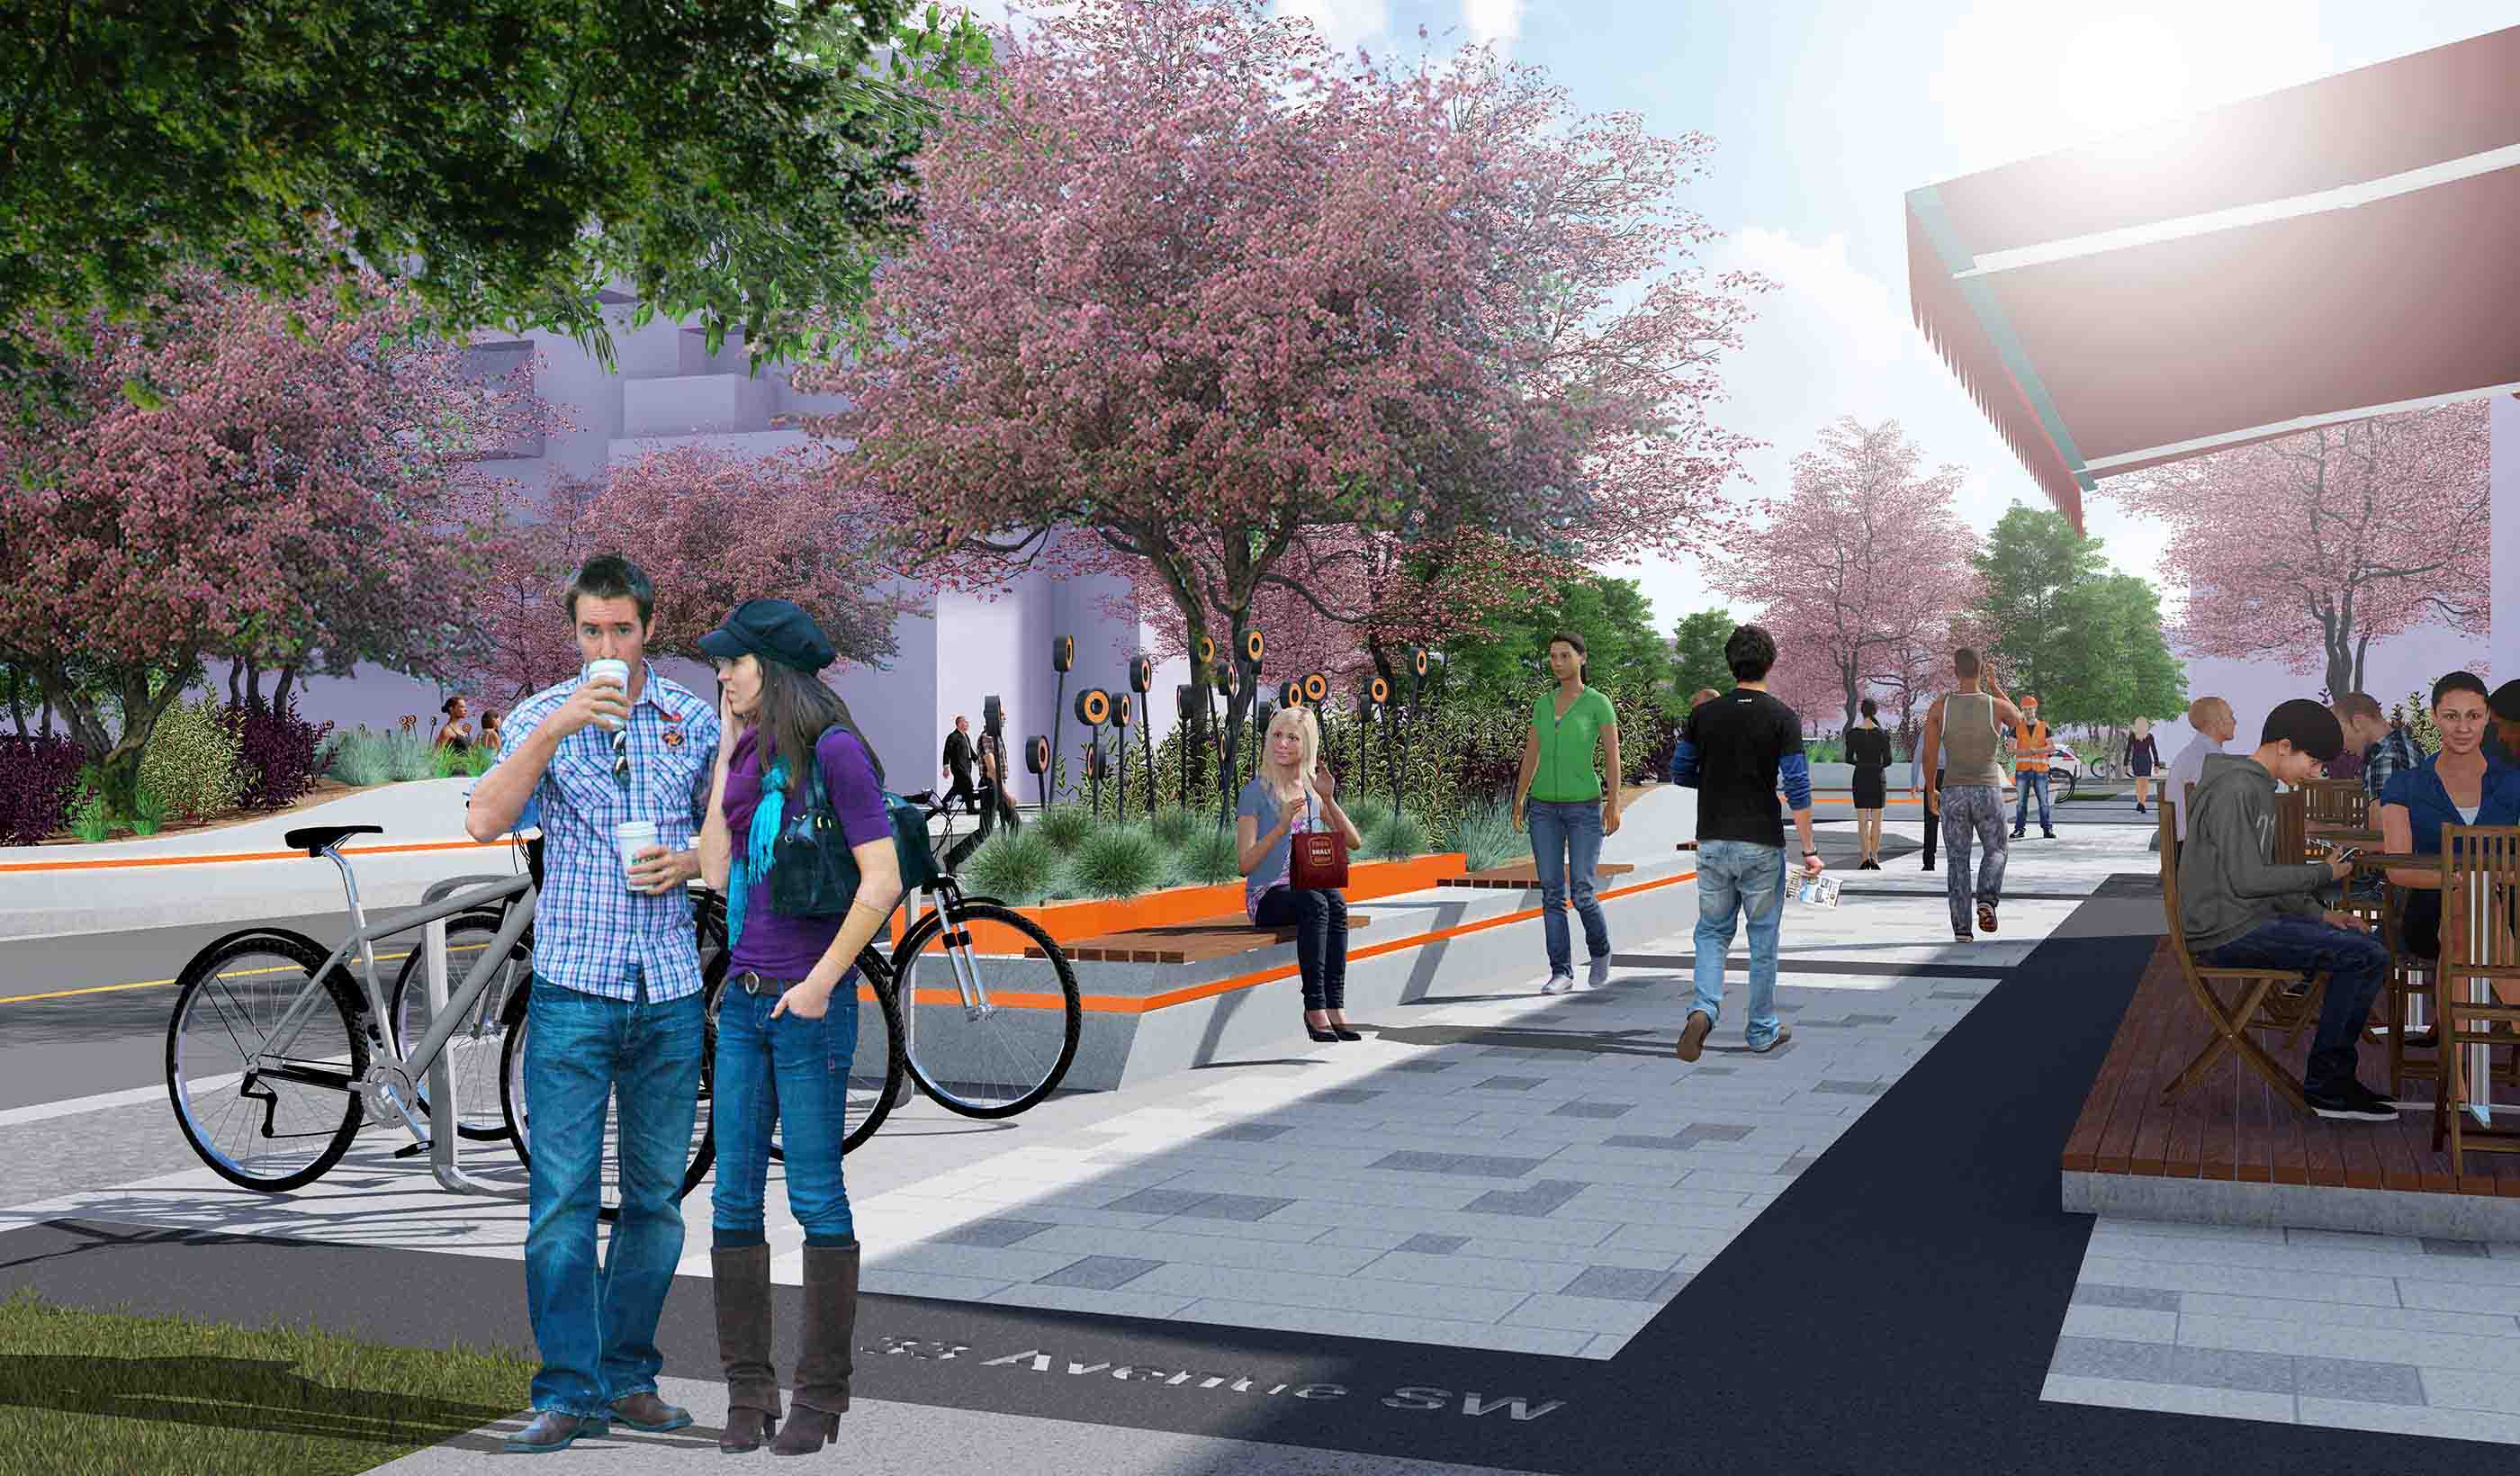 Developing a new open space in your downtown community? Here are 5 key ideas to consider